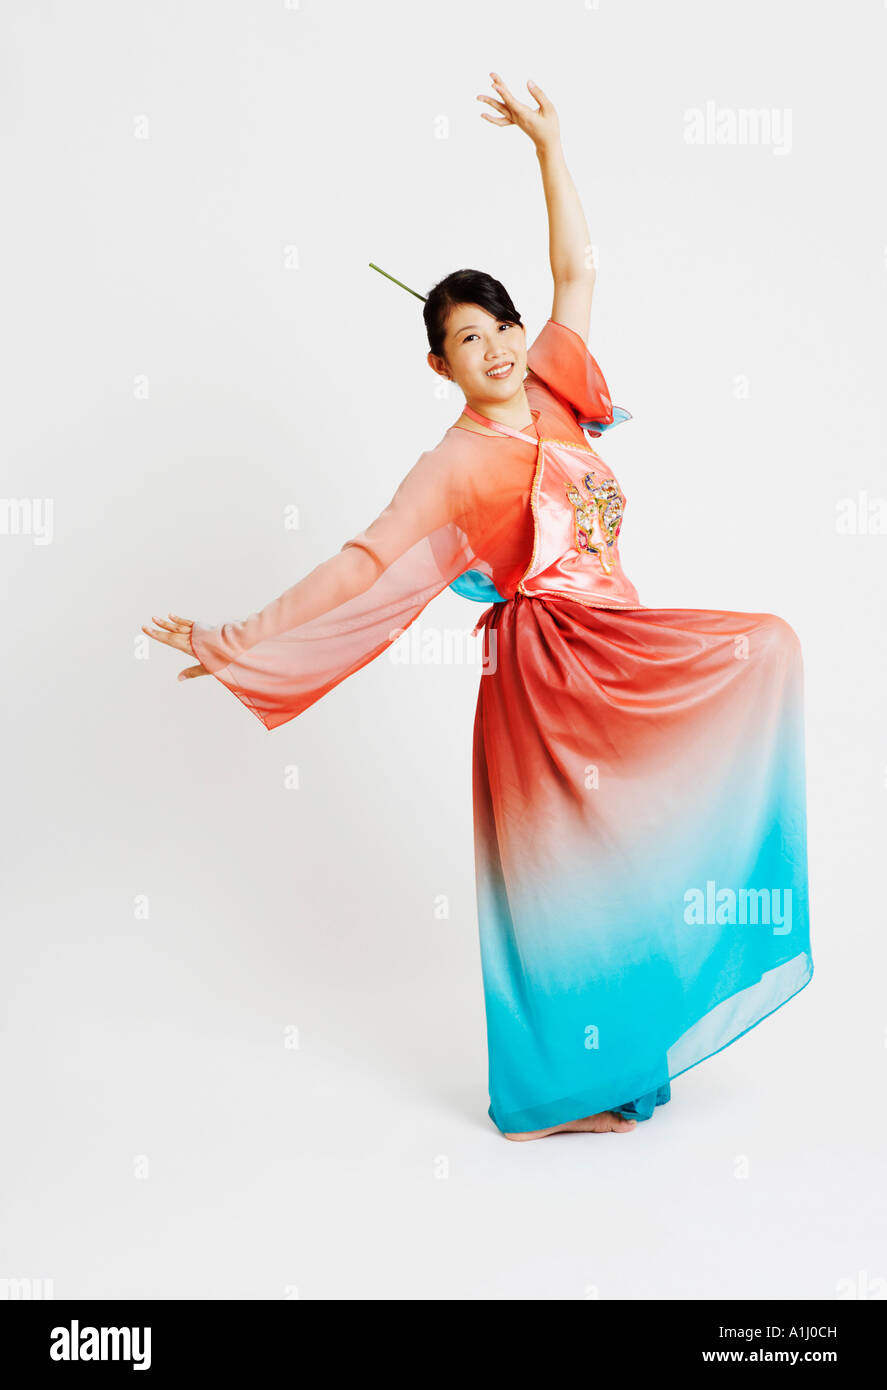 Portrait of a young woman wearing traditional clothing and dancing Stock Photo